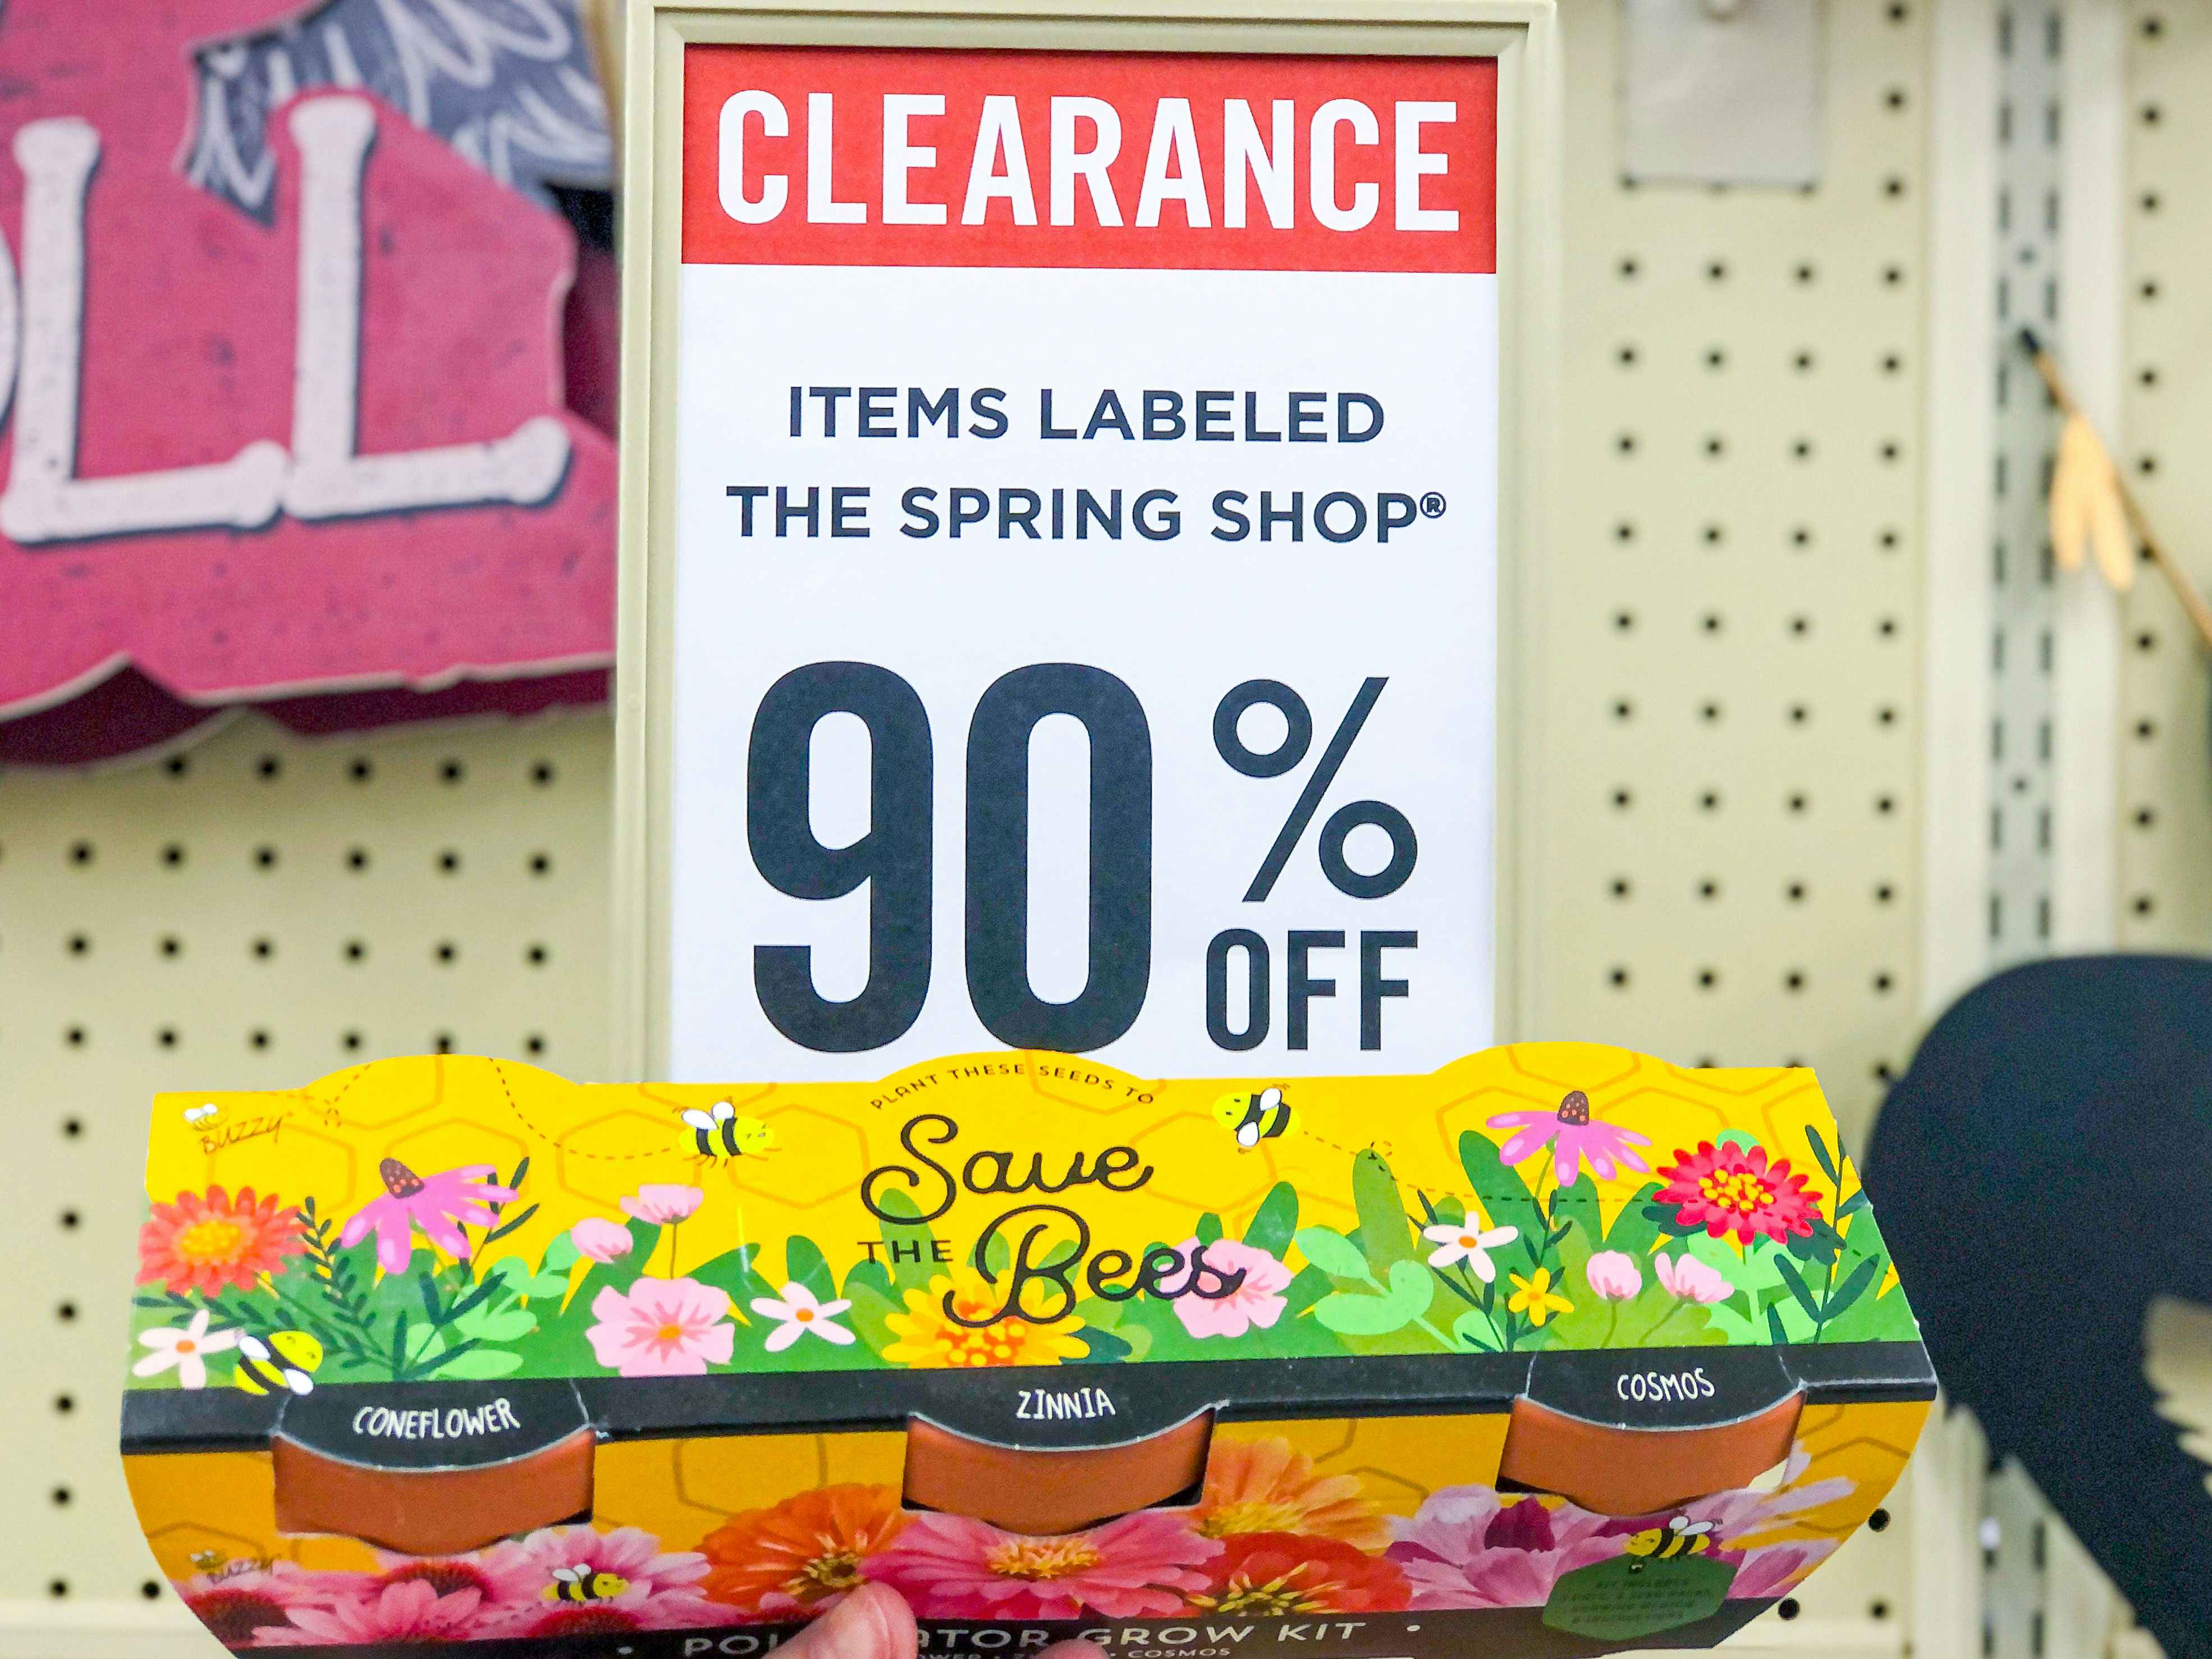 https://prod-cdn-thekrazycouponlady.imgix.net/wp-content/uploads/2023/08/hobby-lobby-90-off-the-spring-shop-clearance-8620-1692634108-1692634108.jpg?auto=format&fit=fill&q=25